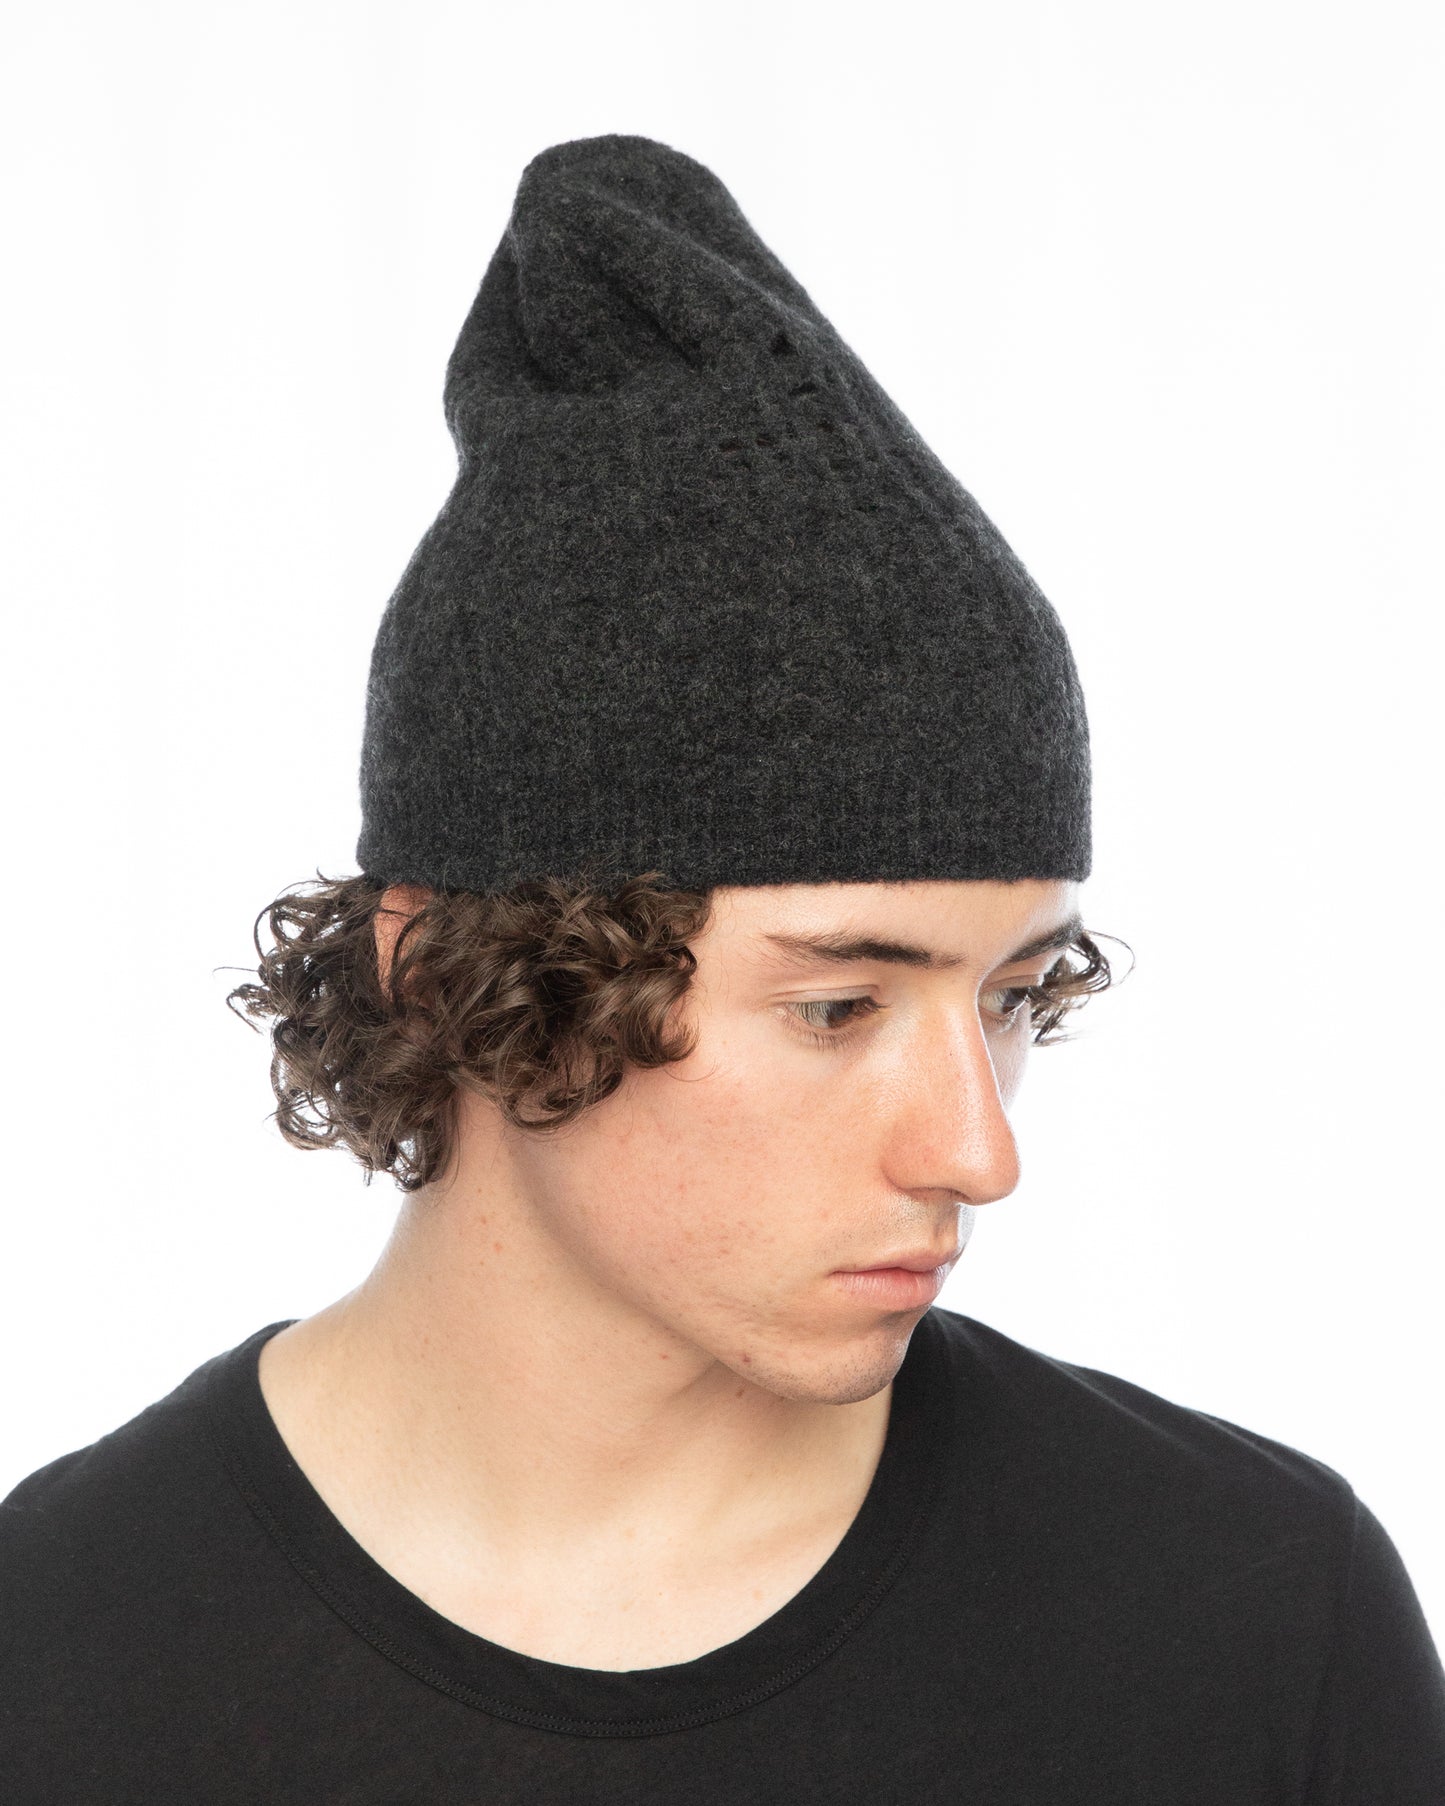 Graphite Destroyed Cut-Outs Wool Yak Knit Beanie